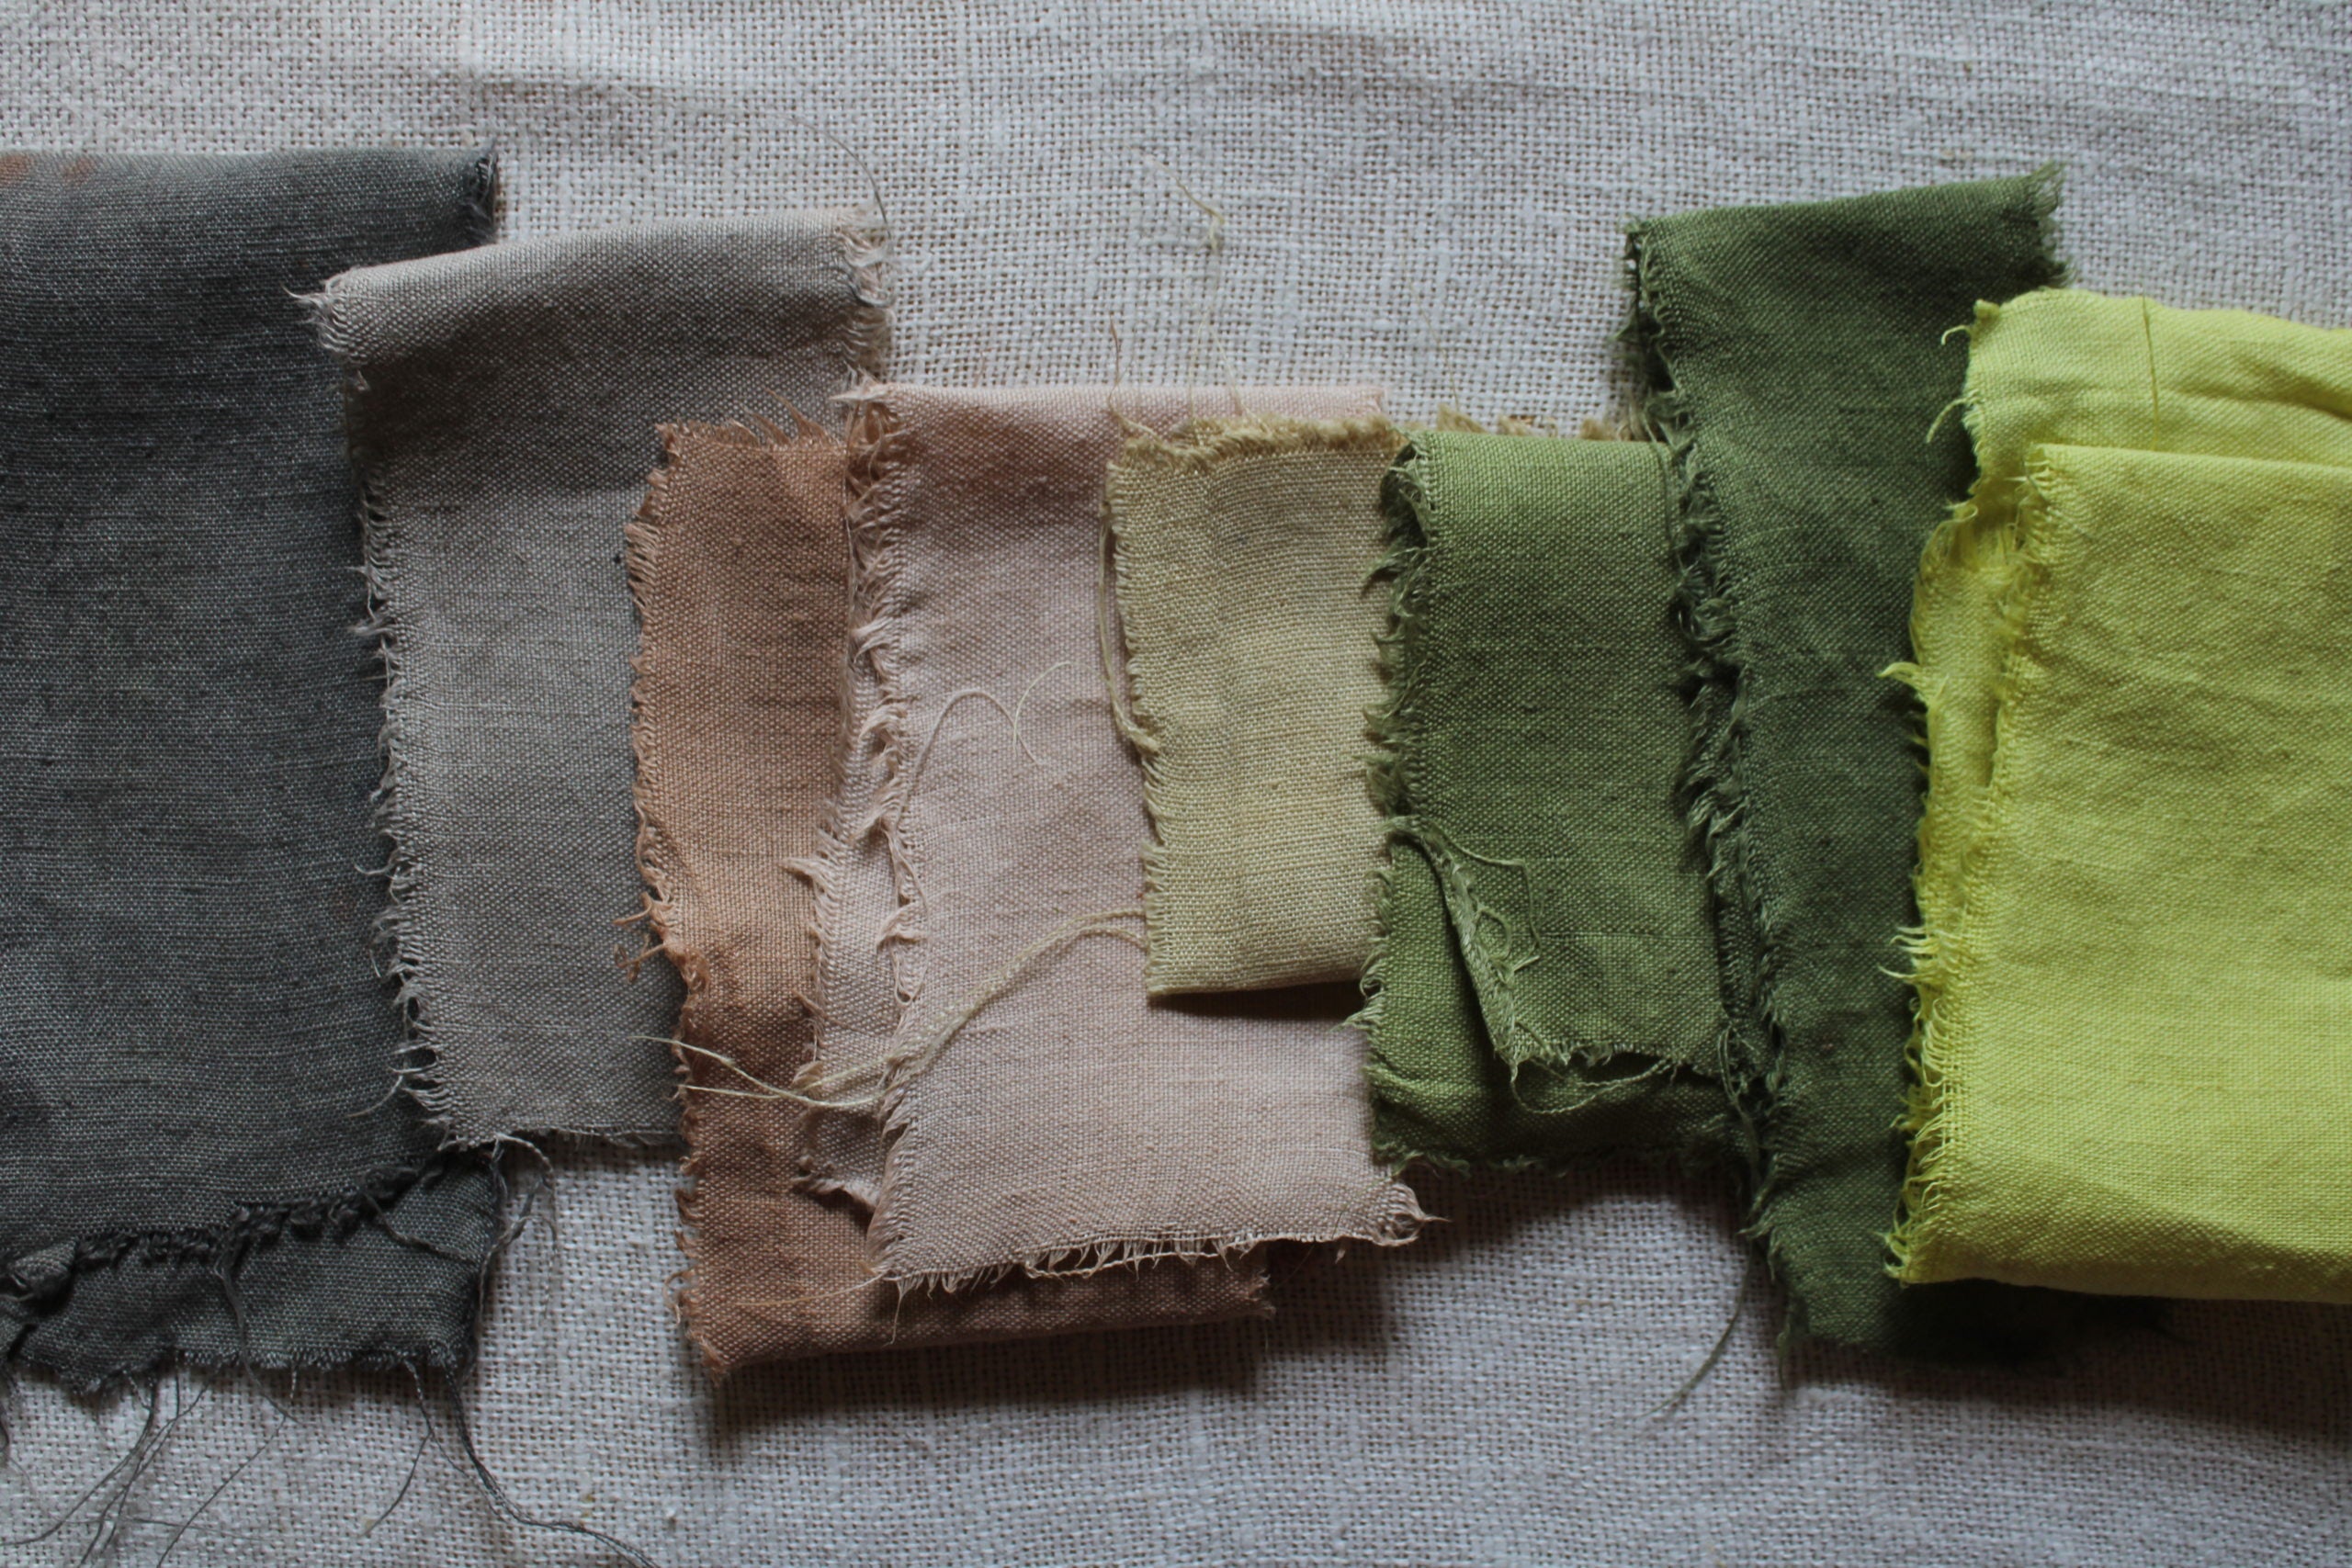 83 Plants You Can Create Fabric Dyes From - One Hundred Dollars a